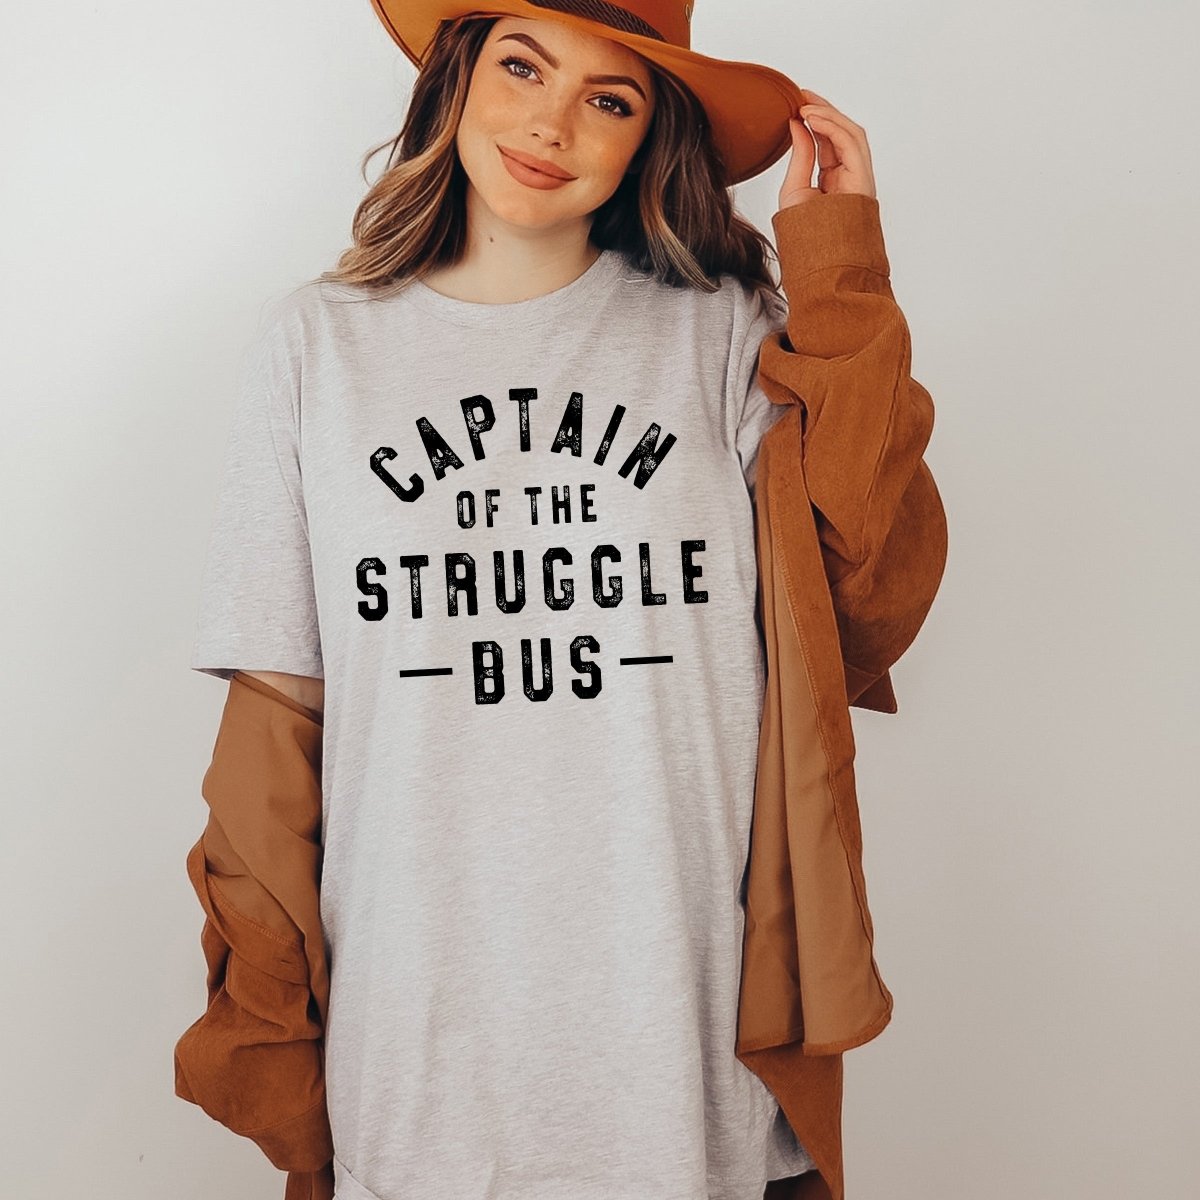 Captain of the Struggle Bus Tee - Limeberry Designs